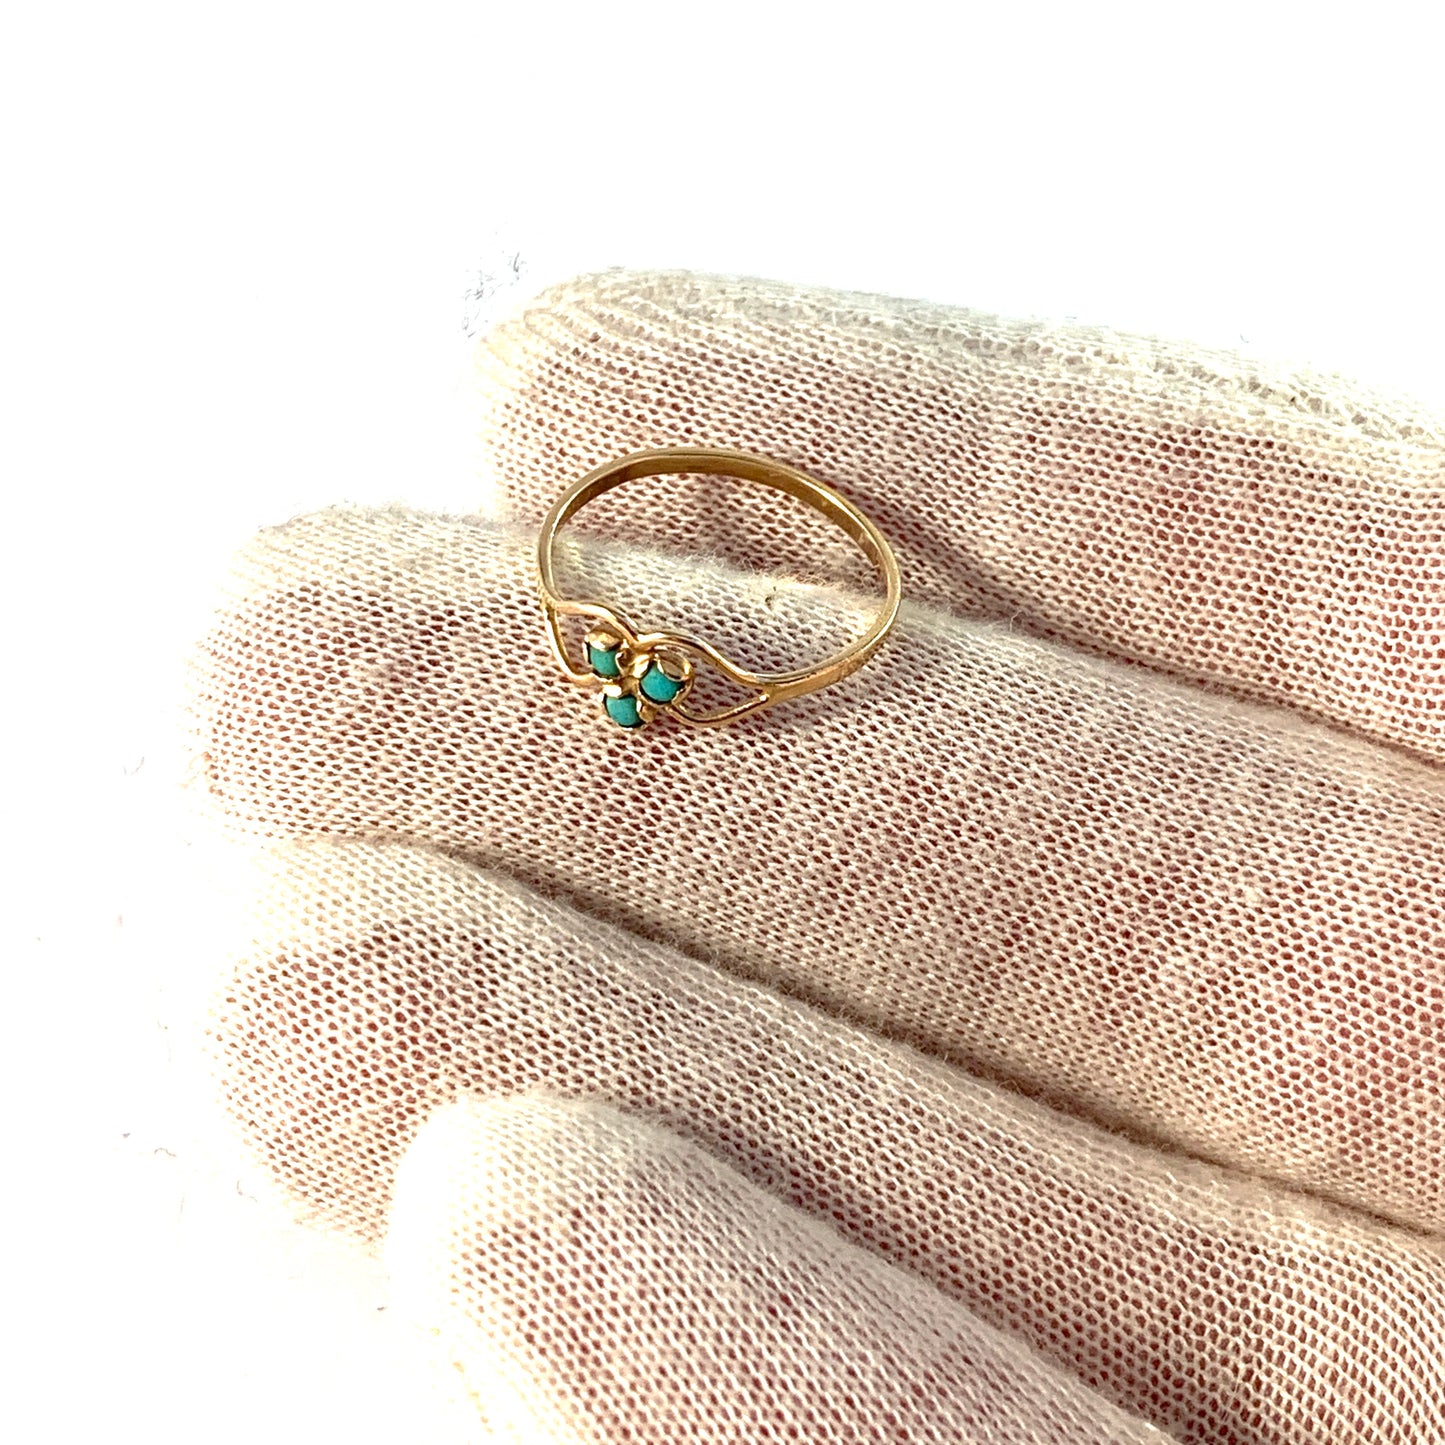 Early 1900s. Antique 14k Gold Turquoise Ring.